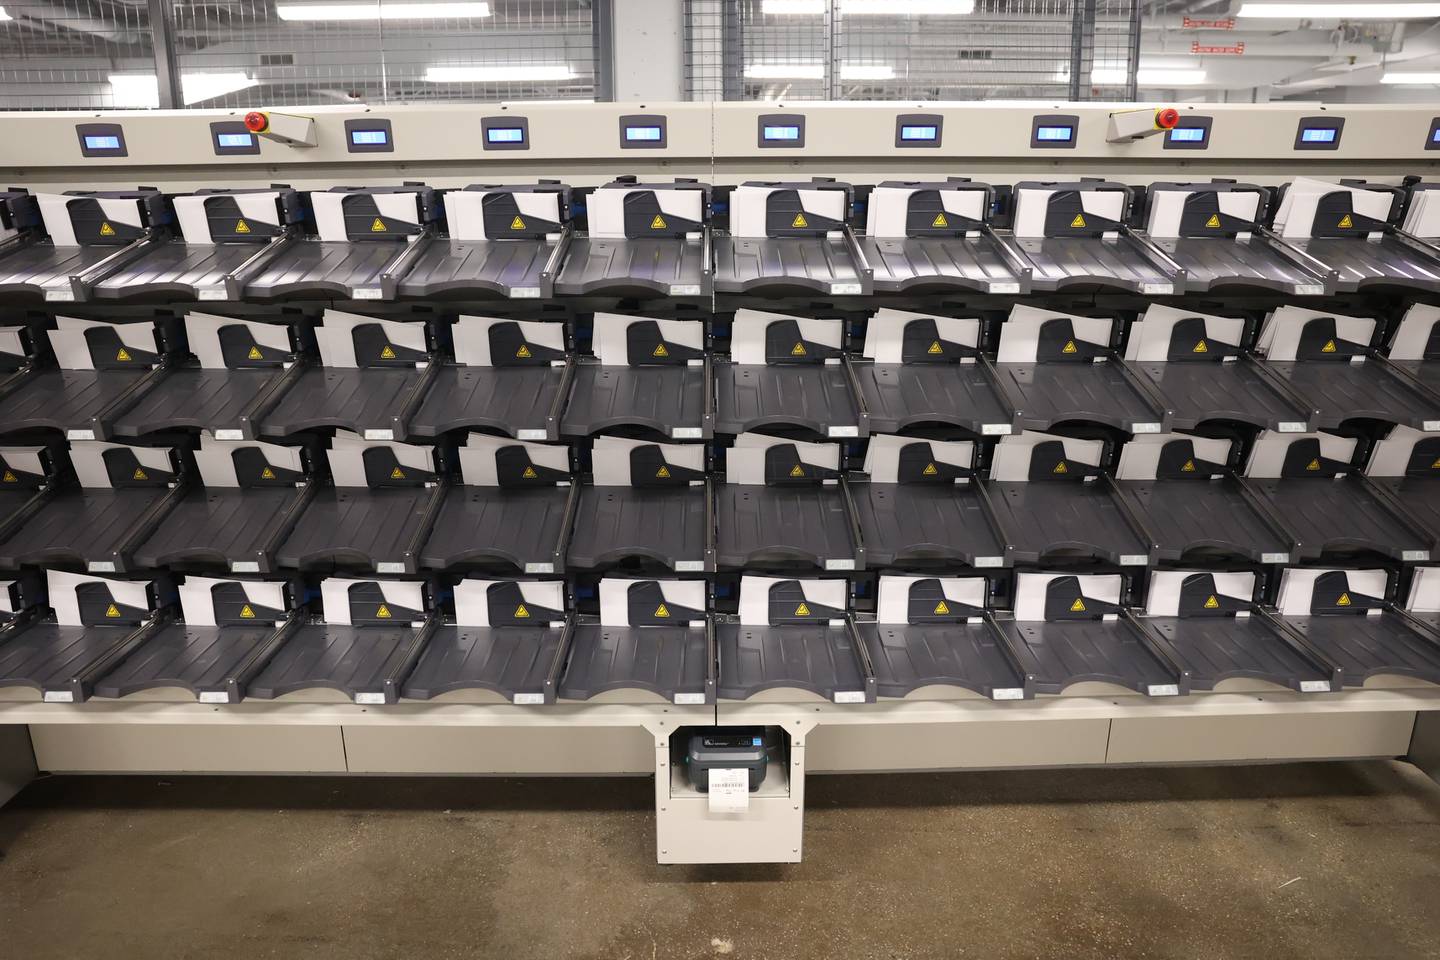 The Vantage sorter is capable of sorting over 2,500 ballots in an hour currently stored in the Will County Office Building. Monday, Mar. 8, 2022, in Joliet.